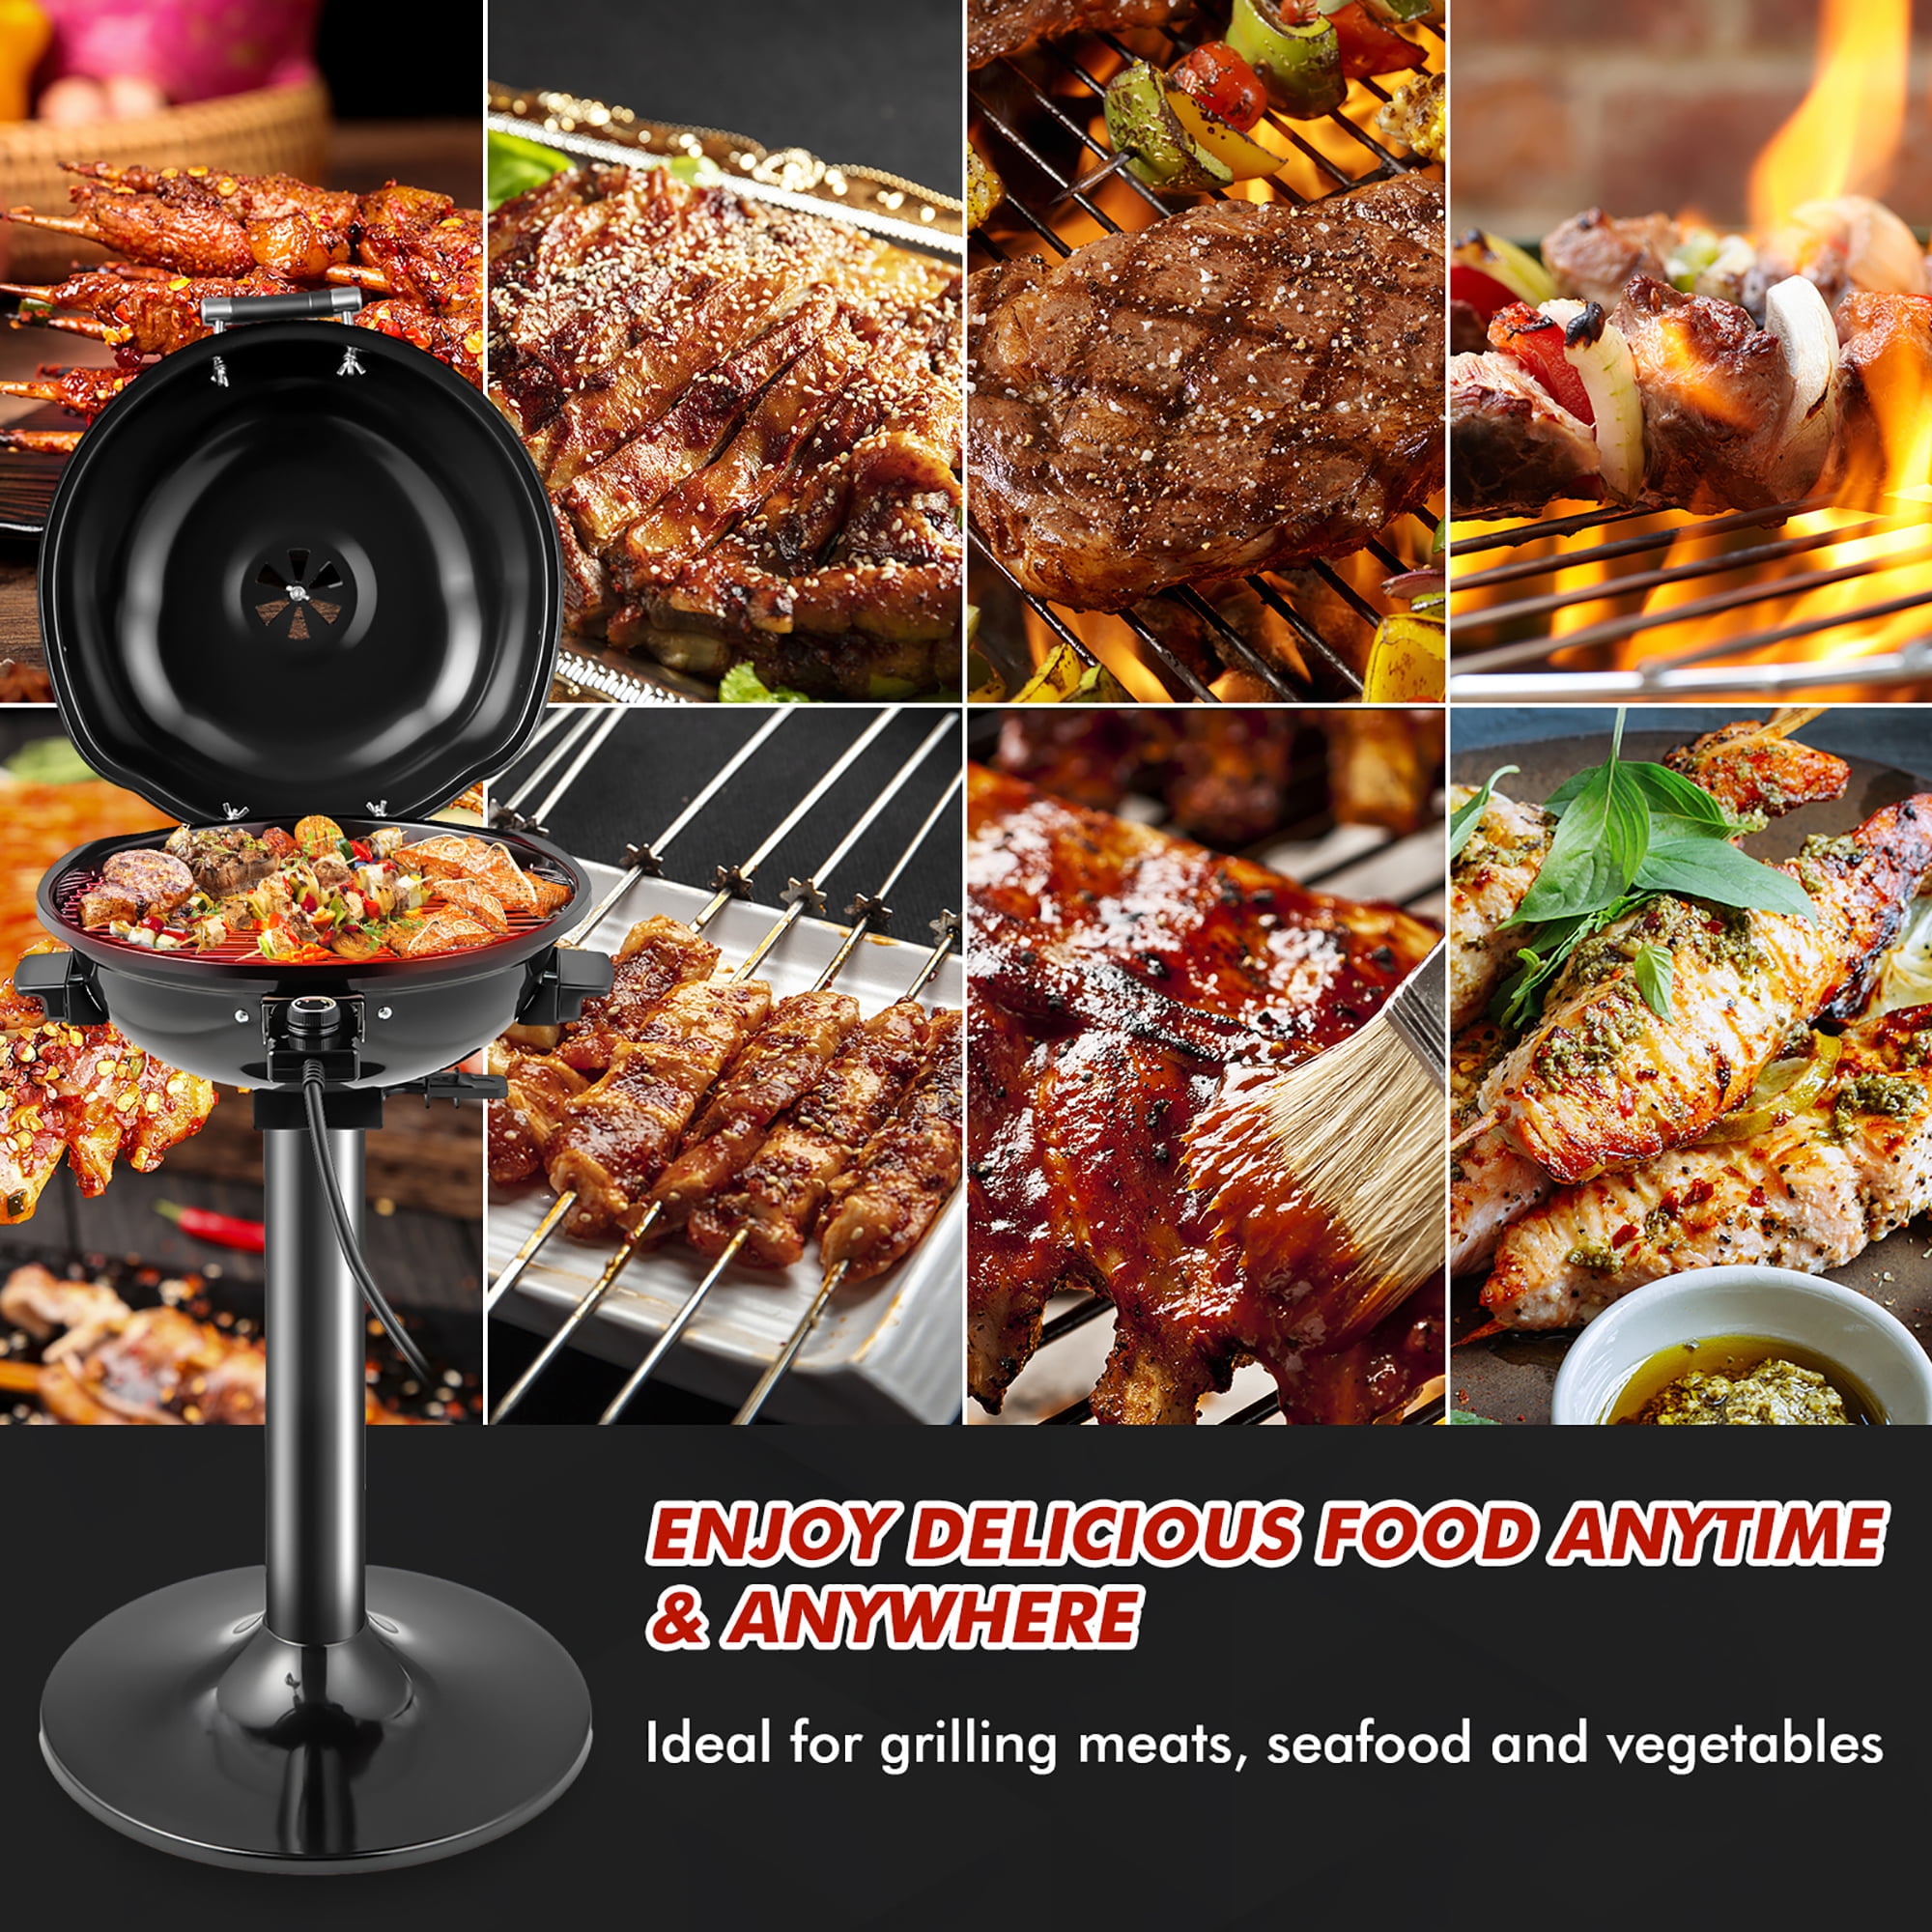 Barton 1600W Infrared Smokeless Electric Indoor Grill BBQ Grilling